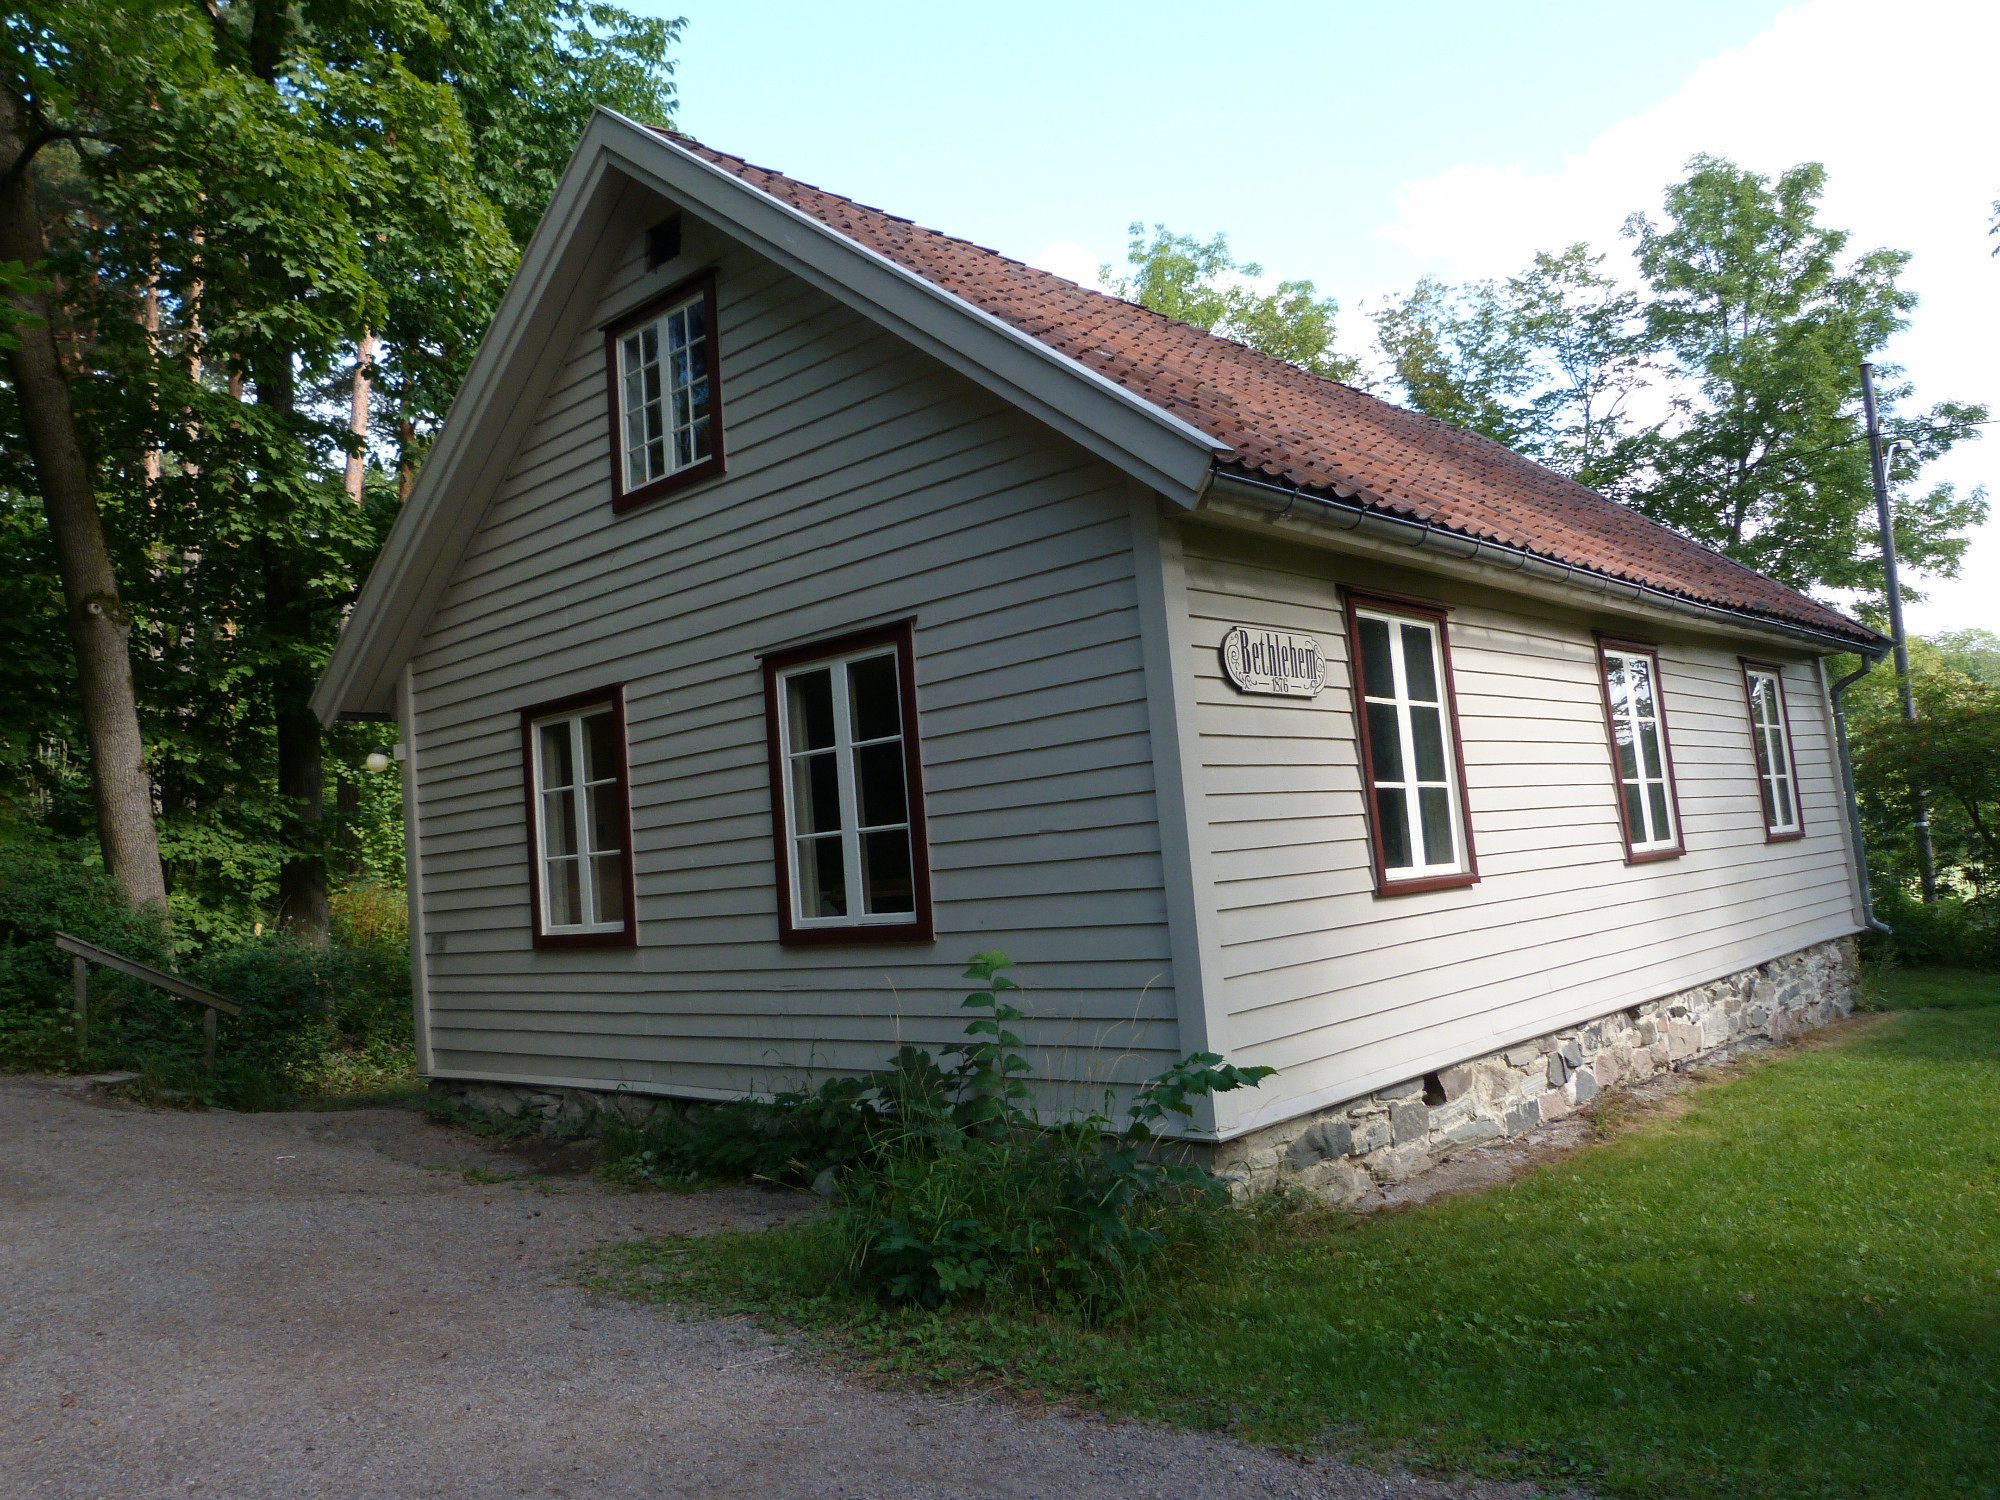 Schoolhouse from Natås in Lindås 1866-67